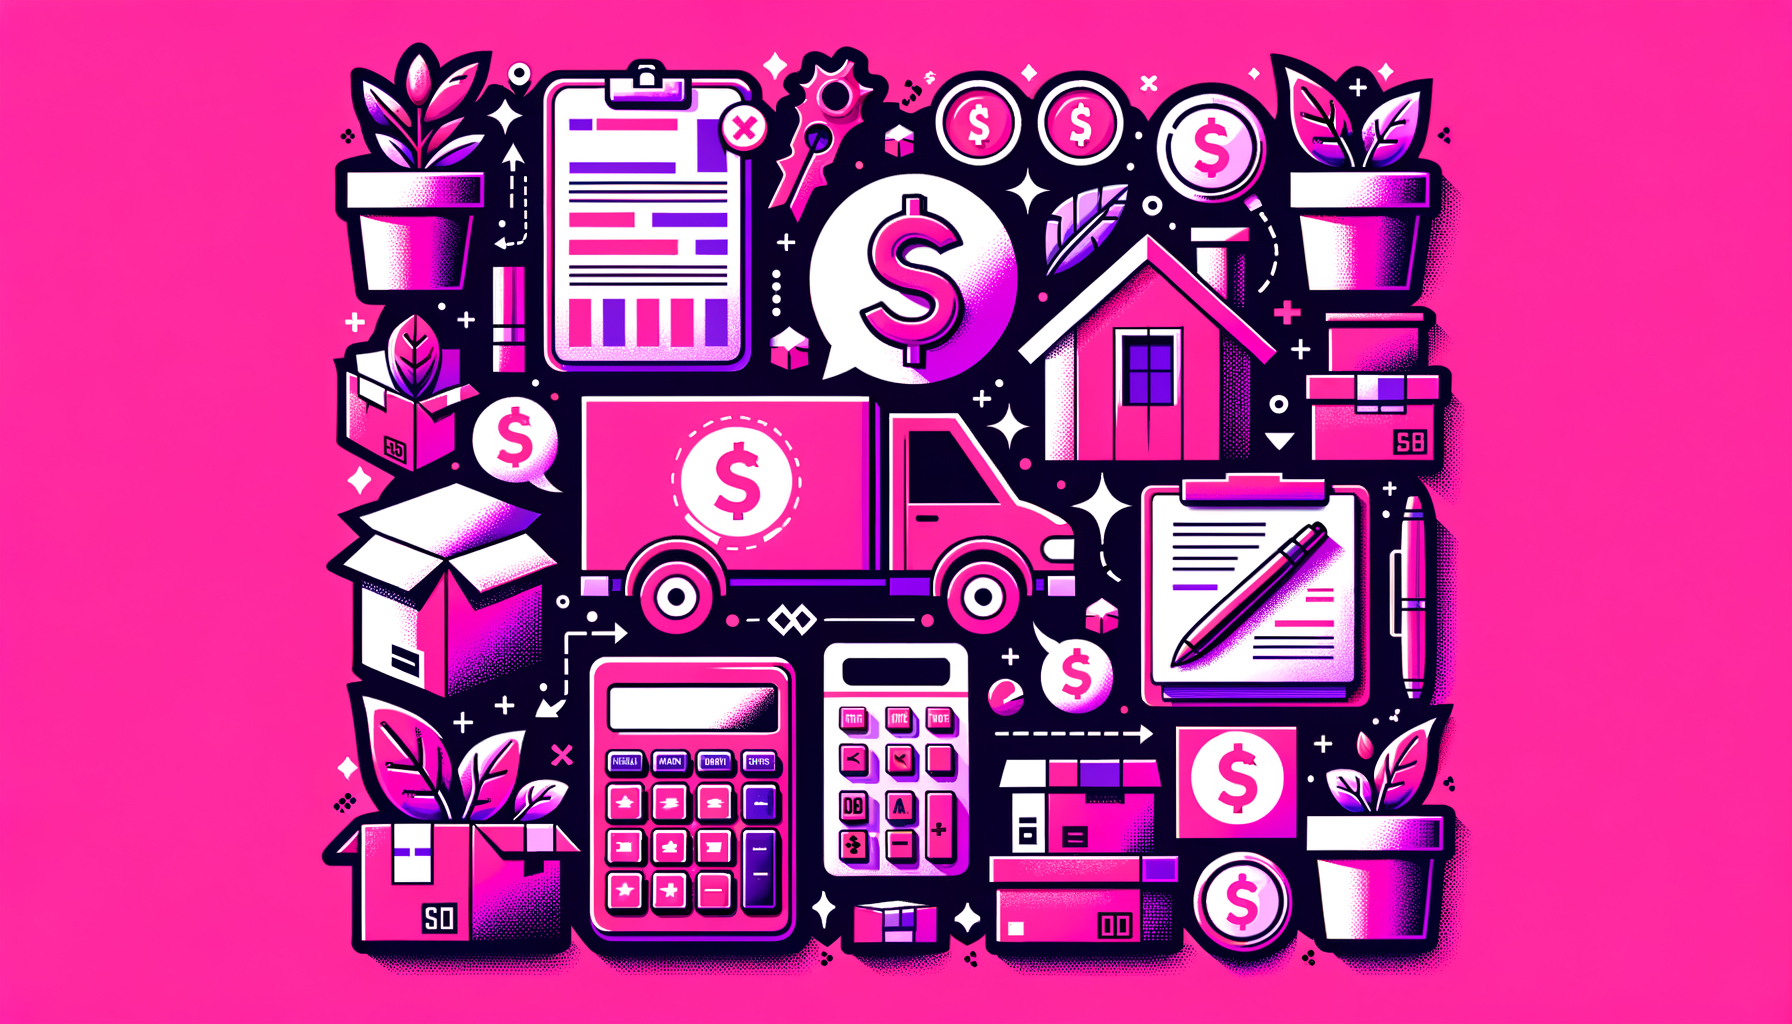 Cartoon illustration of a fuschia-colored budget notebook and calculator, symbolizing the guide to avoid hidden moving costs.